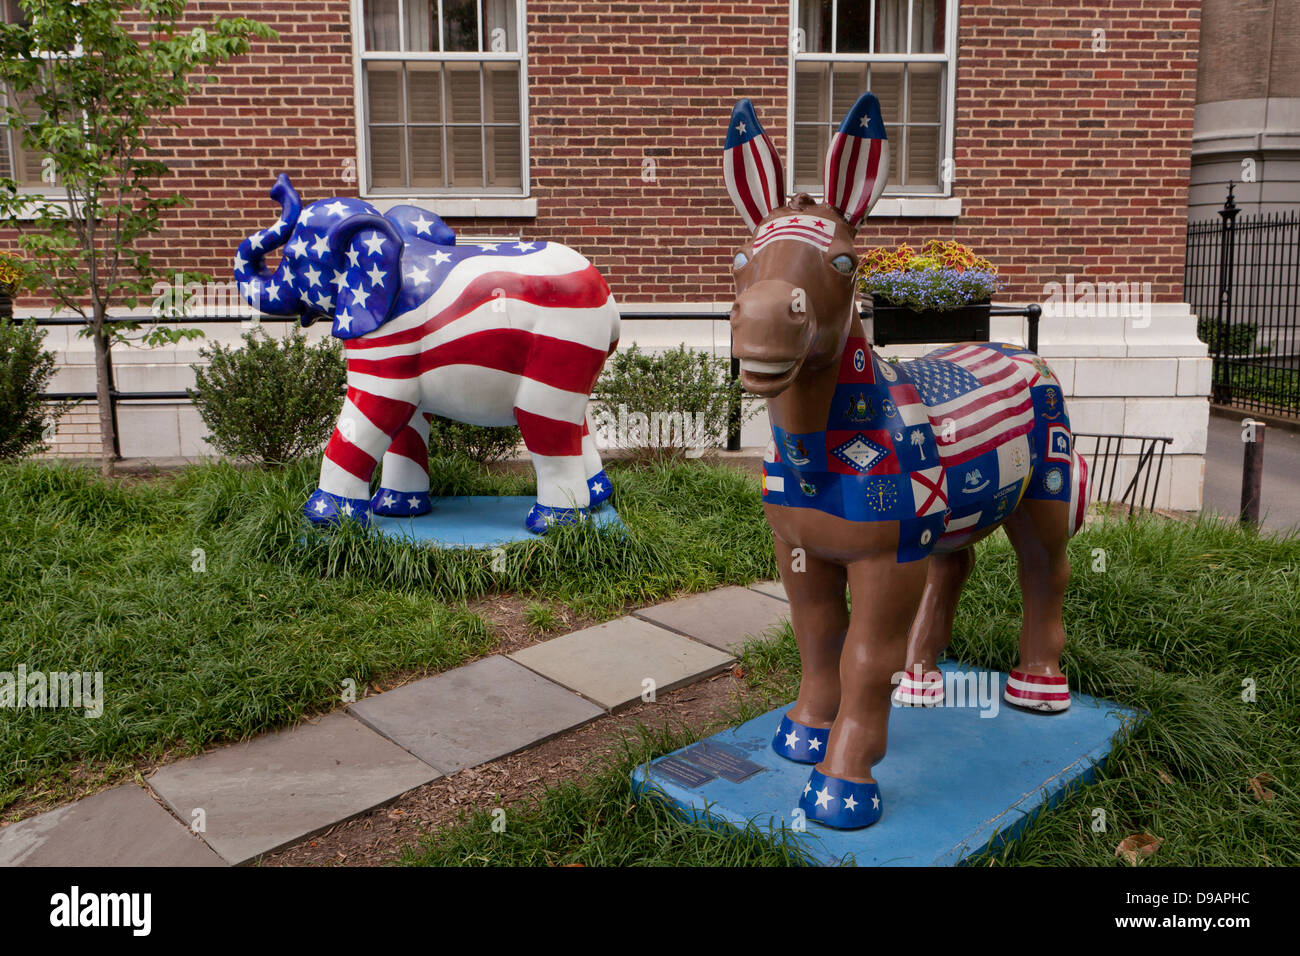 US political party mascots, donkey and elephant, painted in red, white, and blue Stock Photo